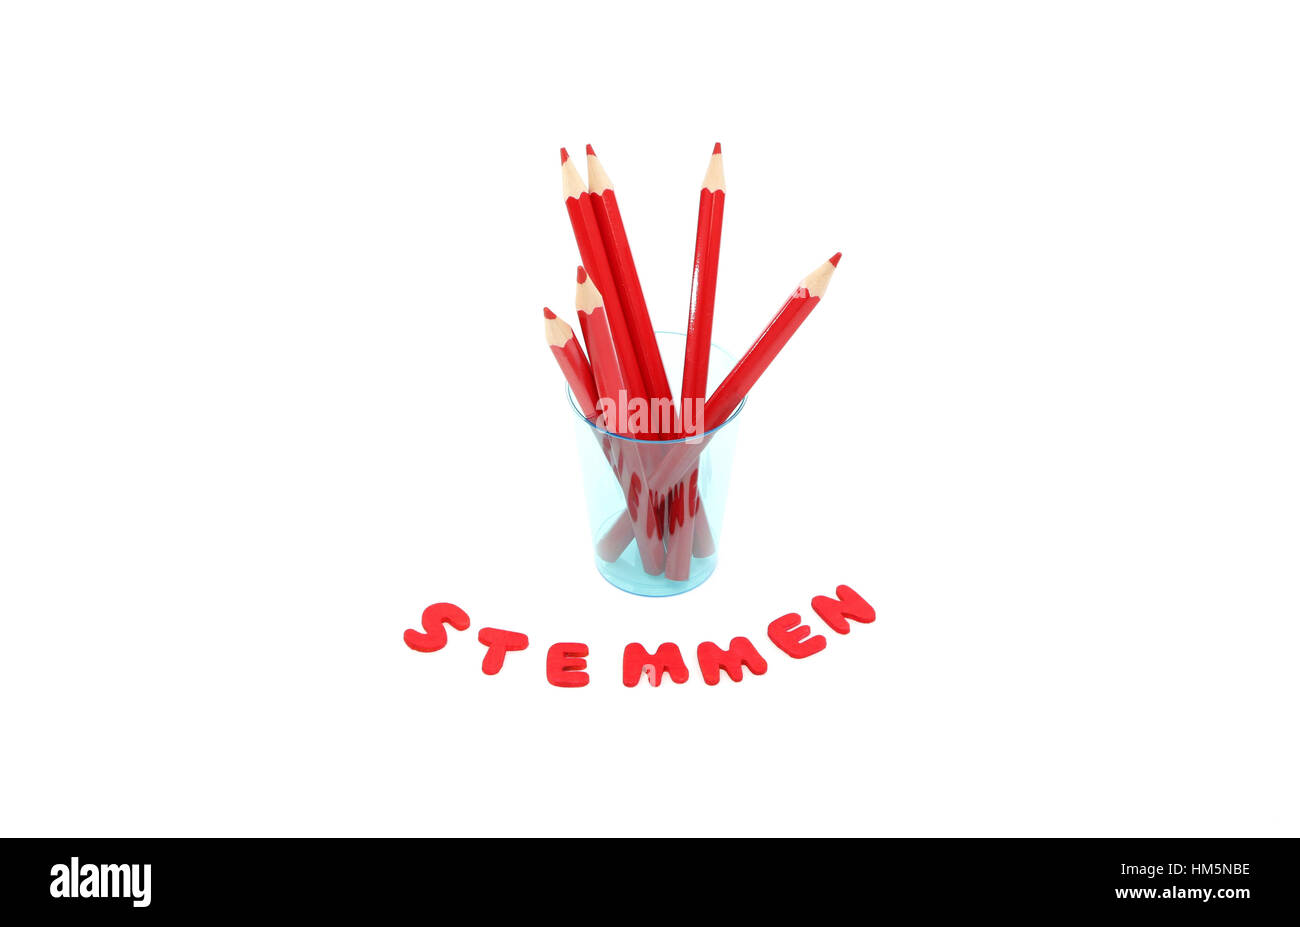 Red pencils and the word stemmen which means to vote in dutch for the upcoming elections on march 15, 2017 in the Netherlands Stock Photo